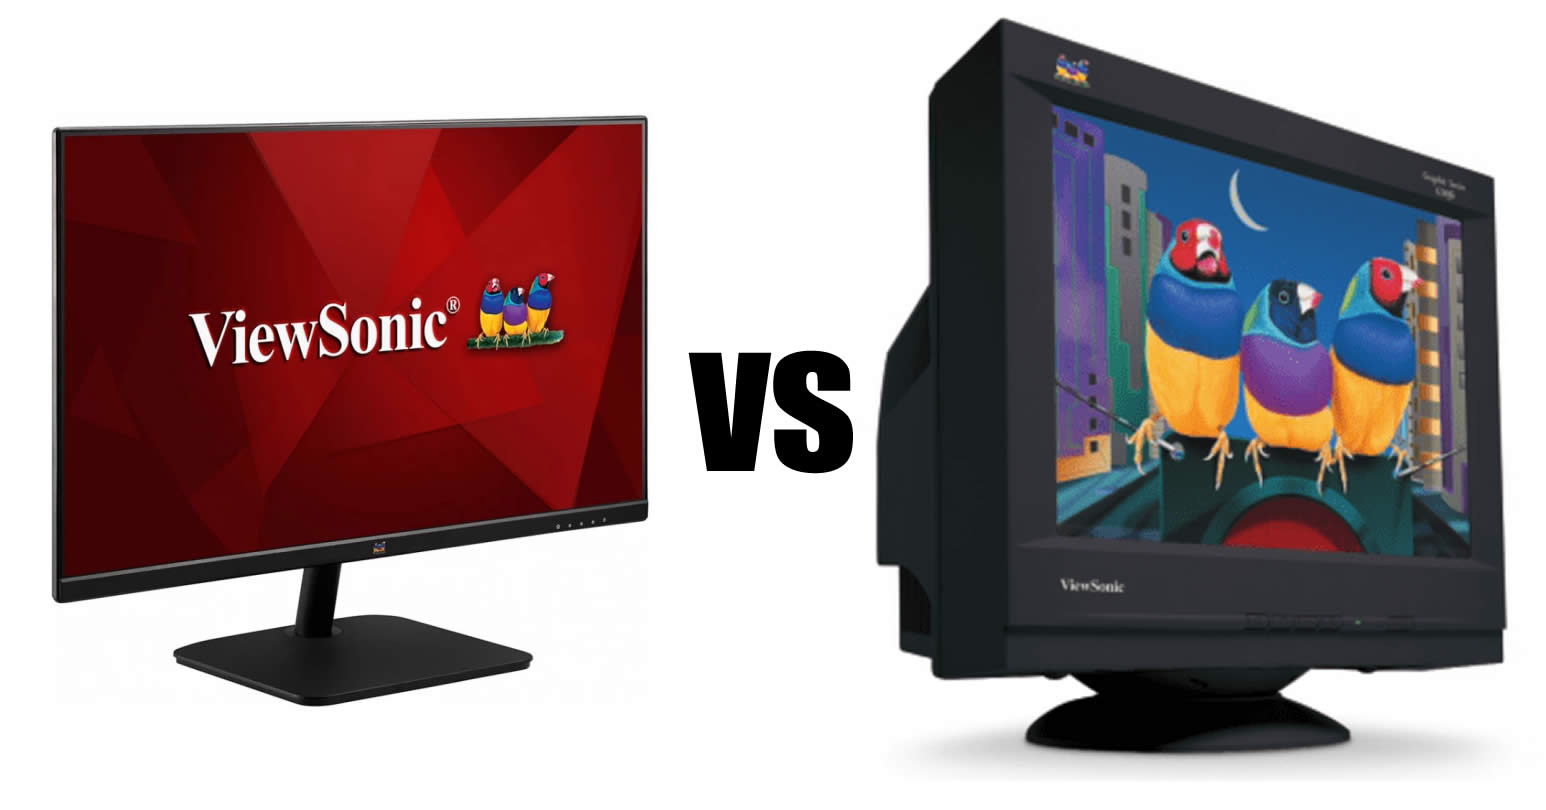 Why is a monitor better than a TV for computers